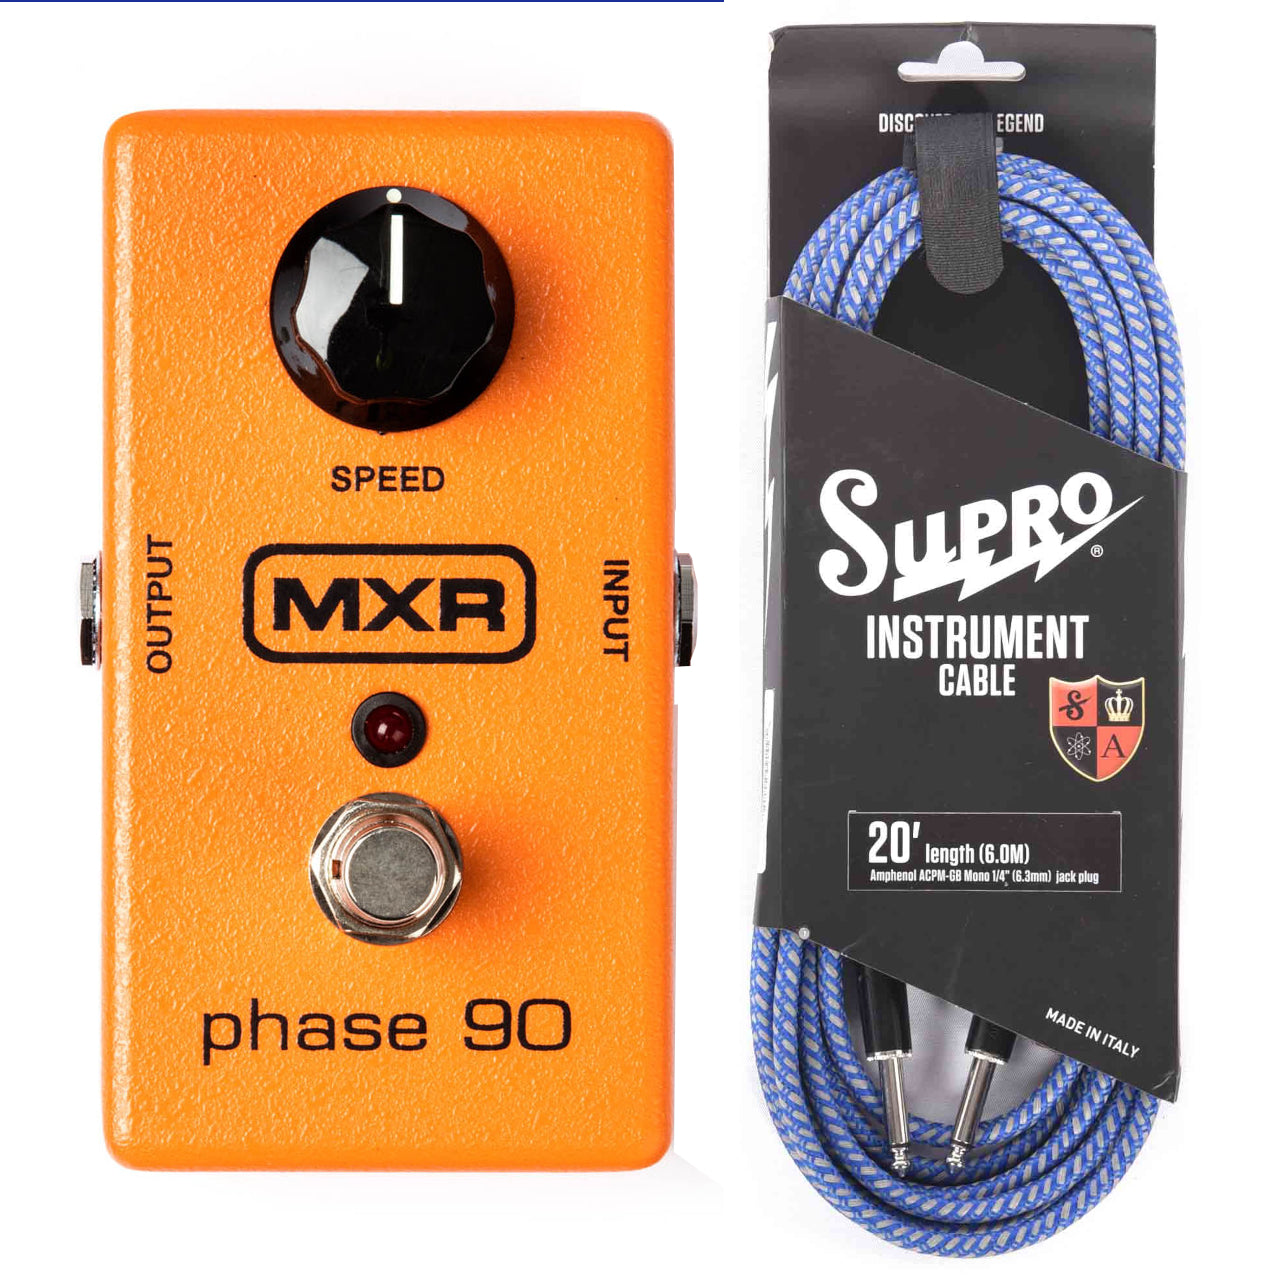 Dunlop MXR M101 Phase 90 Phaser Classic Orange Guitar Effect Pedal + FREE Supro 20' Cable